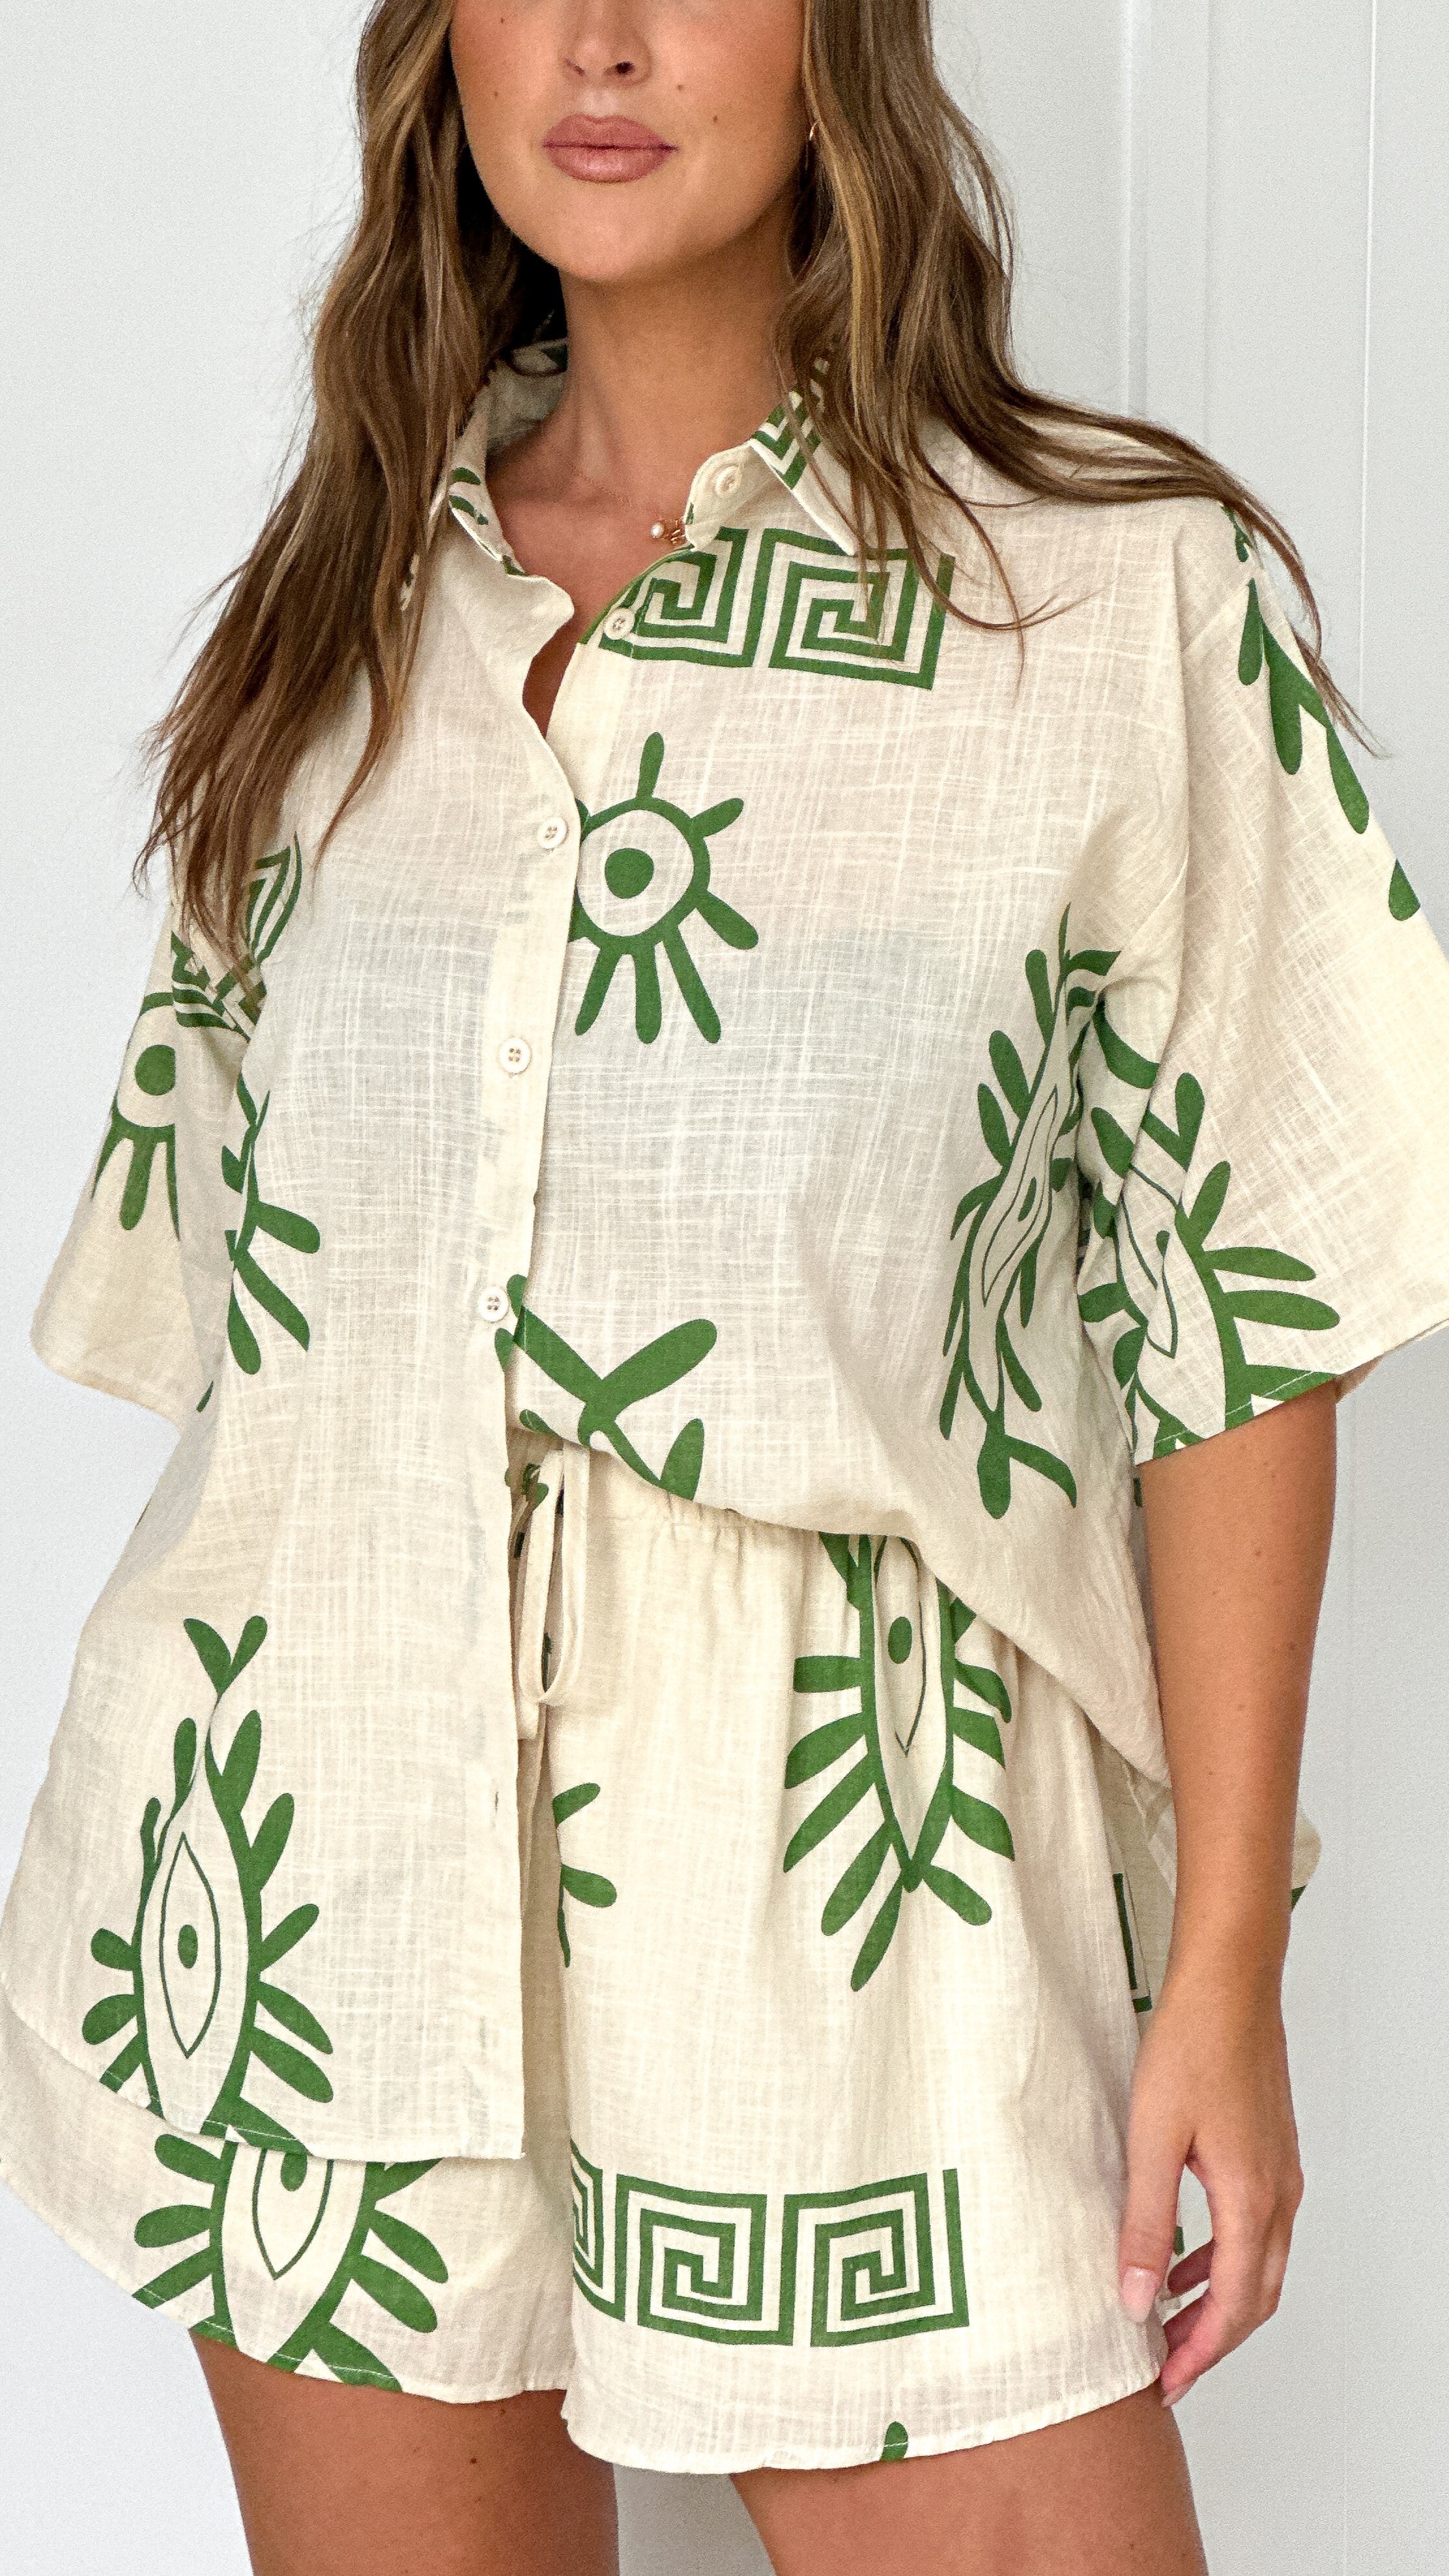 Charli Button Up Shirt and Shorts Set - Beige/Green Aztec